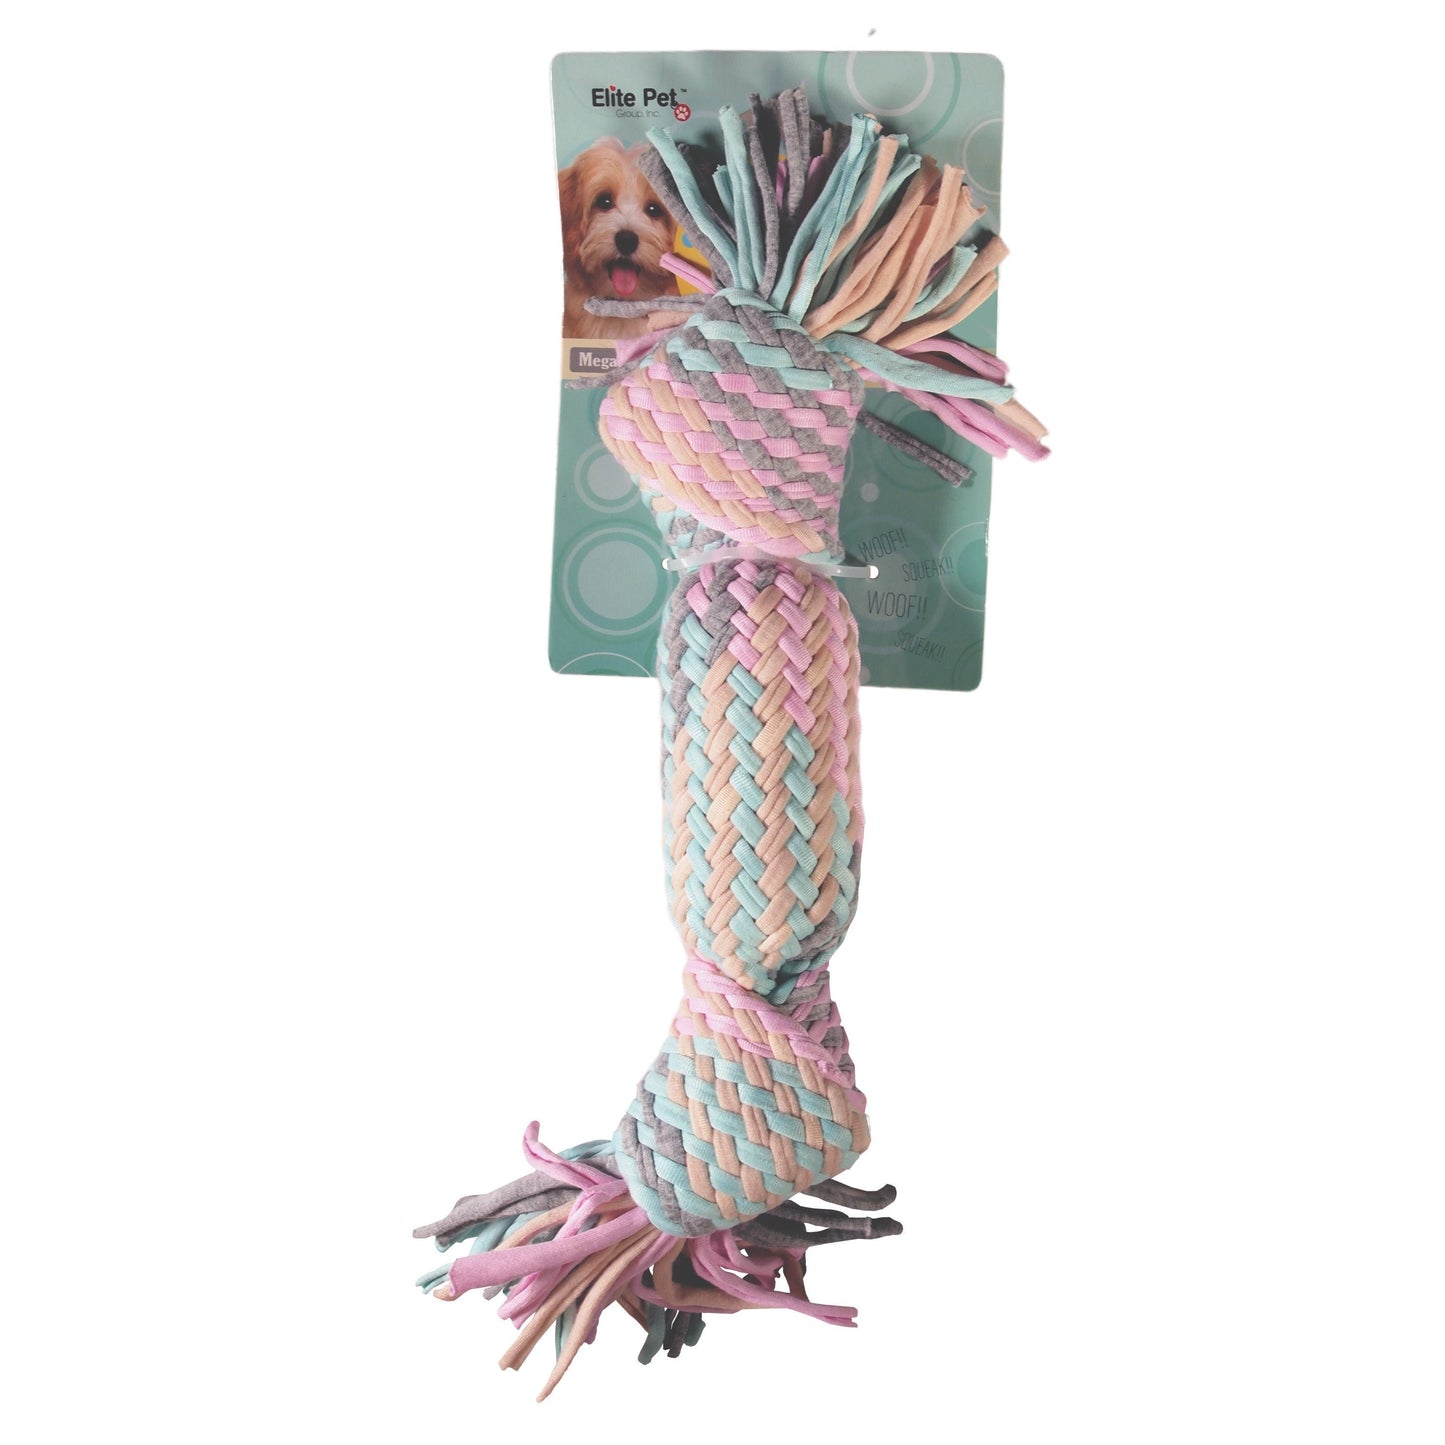 Dog Toy : Woven and Knotted Fleece Pull Toy - Small Version - Pastel Colors - LEAGUE OF CRAFTY CANINES